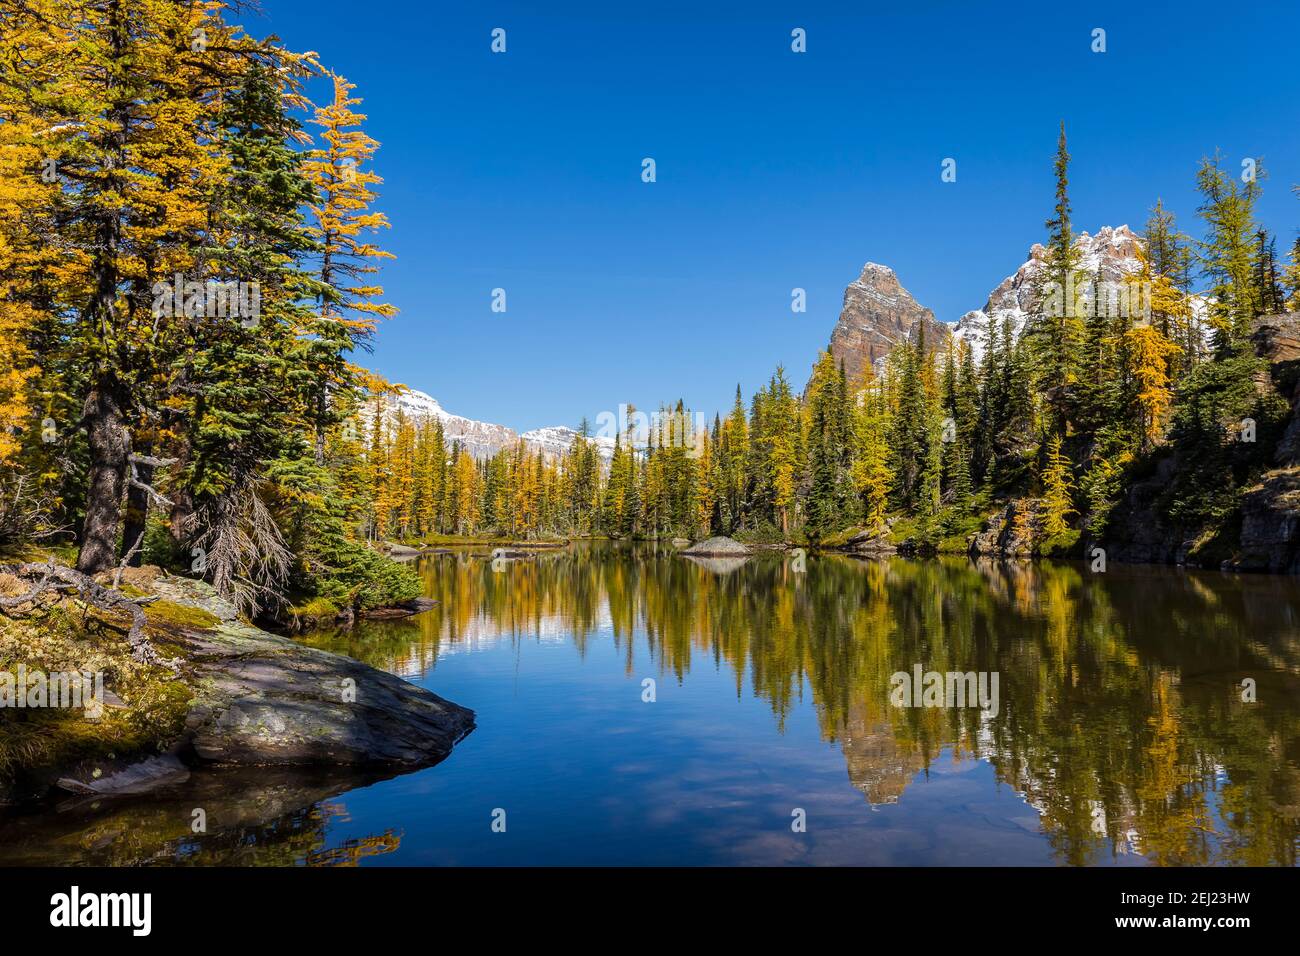 Peaceful autumn landscape of a pond with yellow, gold and green larch tress reflected on calm water, mountains with snow under a blue sky, Canada Stock Photo